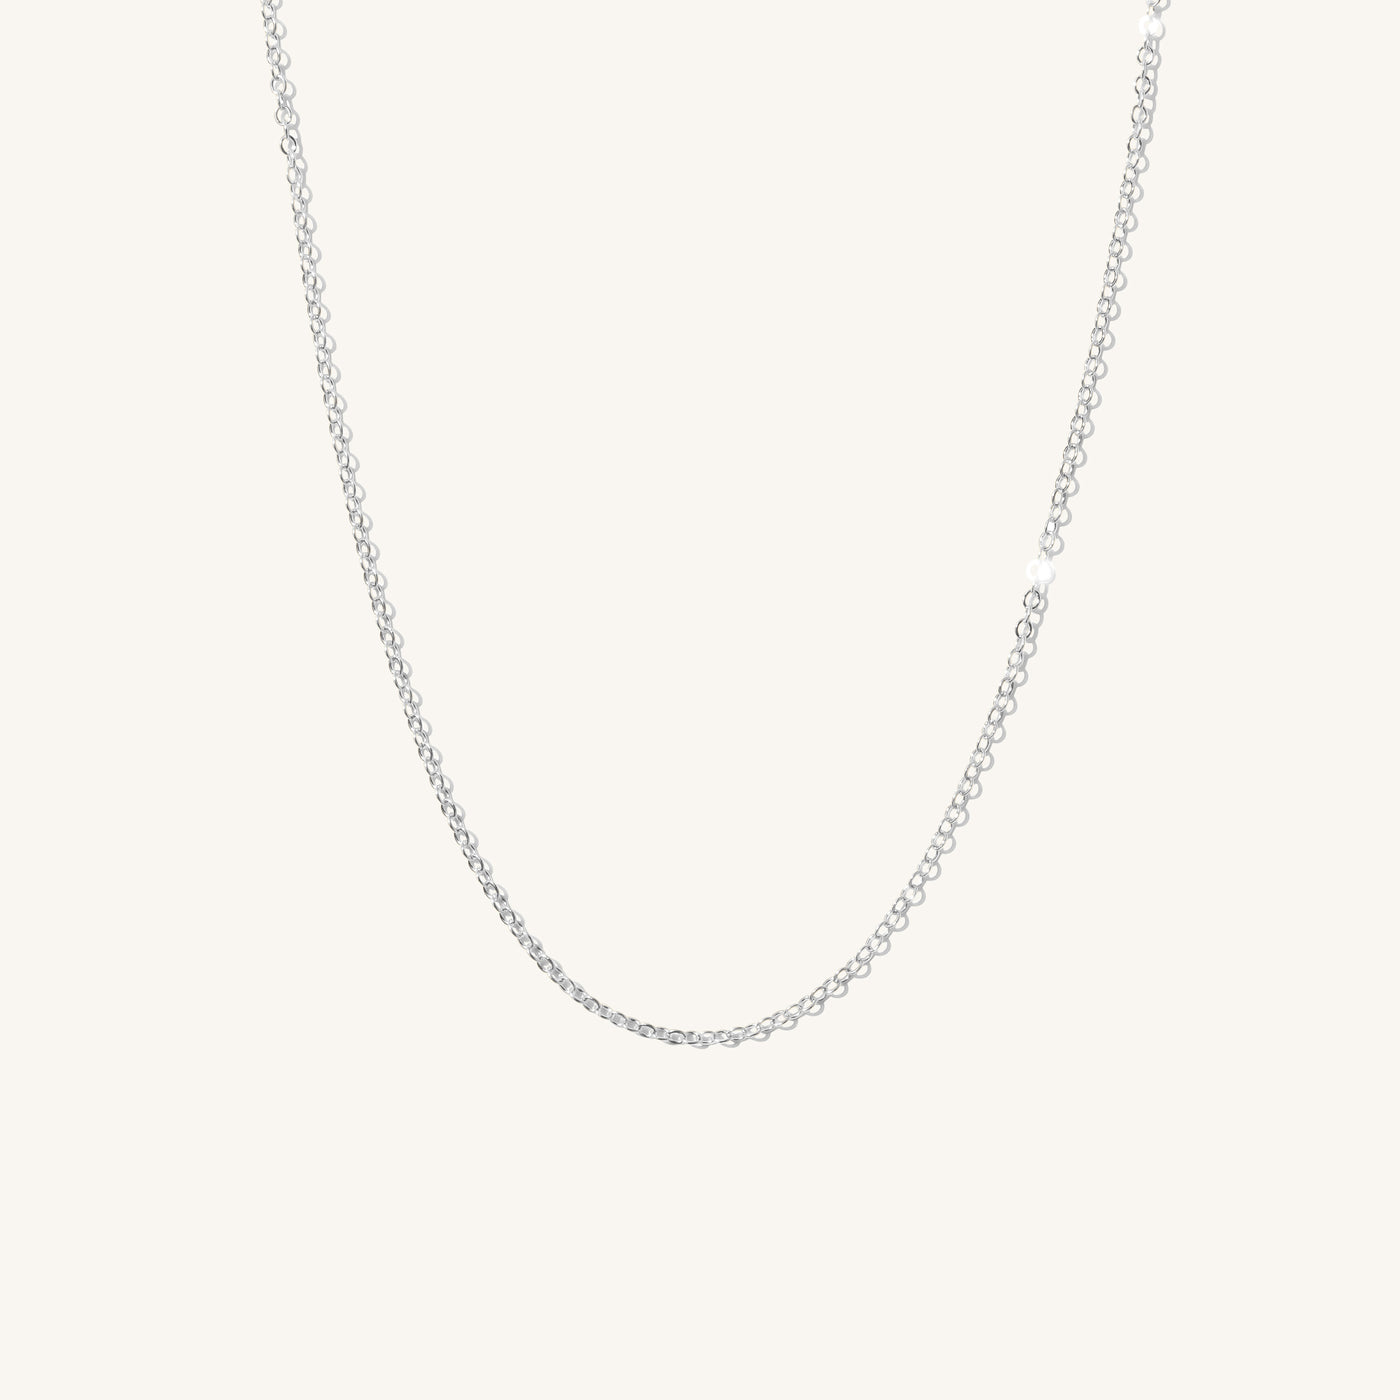 Replacement Chain, Chain Necklace, Simple Chain Necklace, Chain